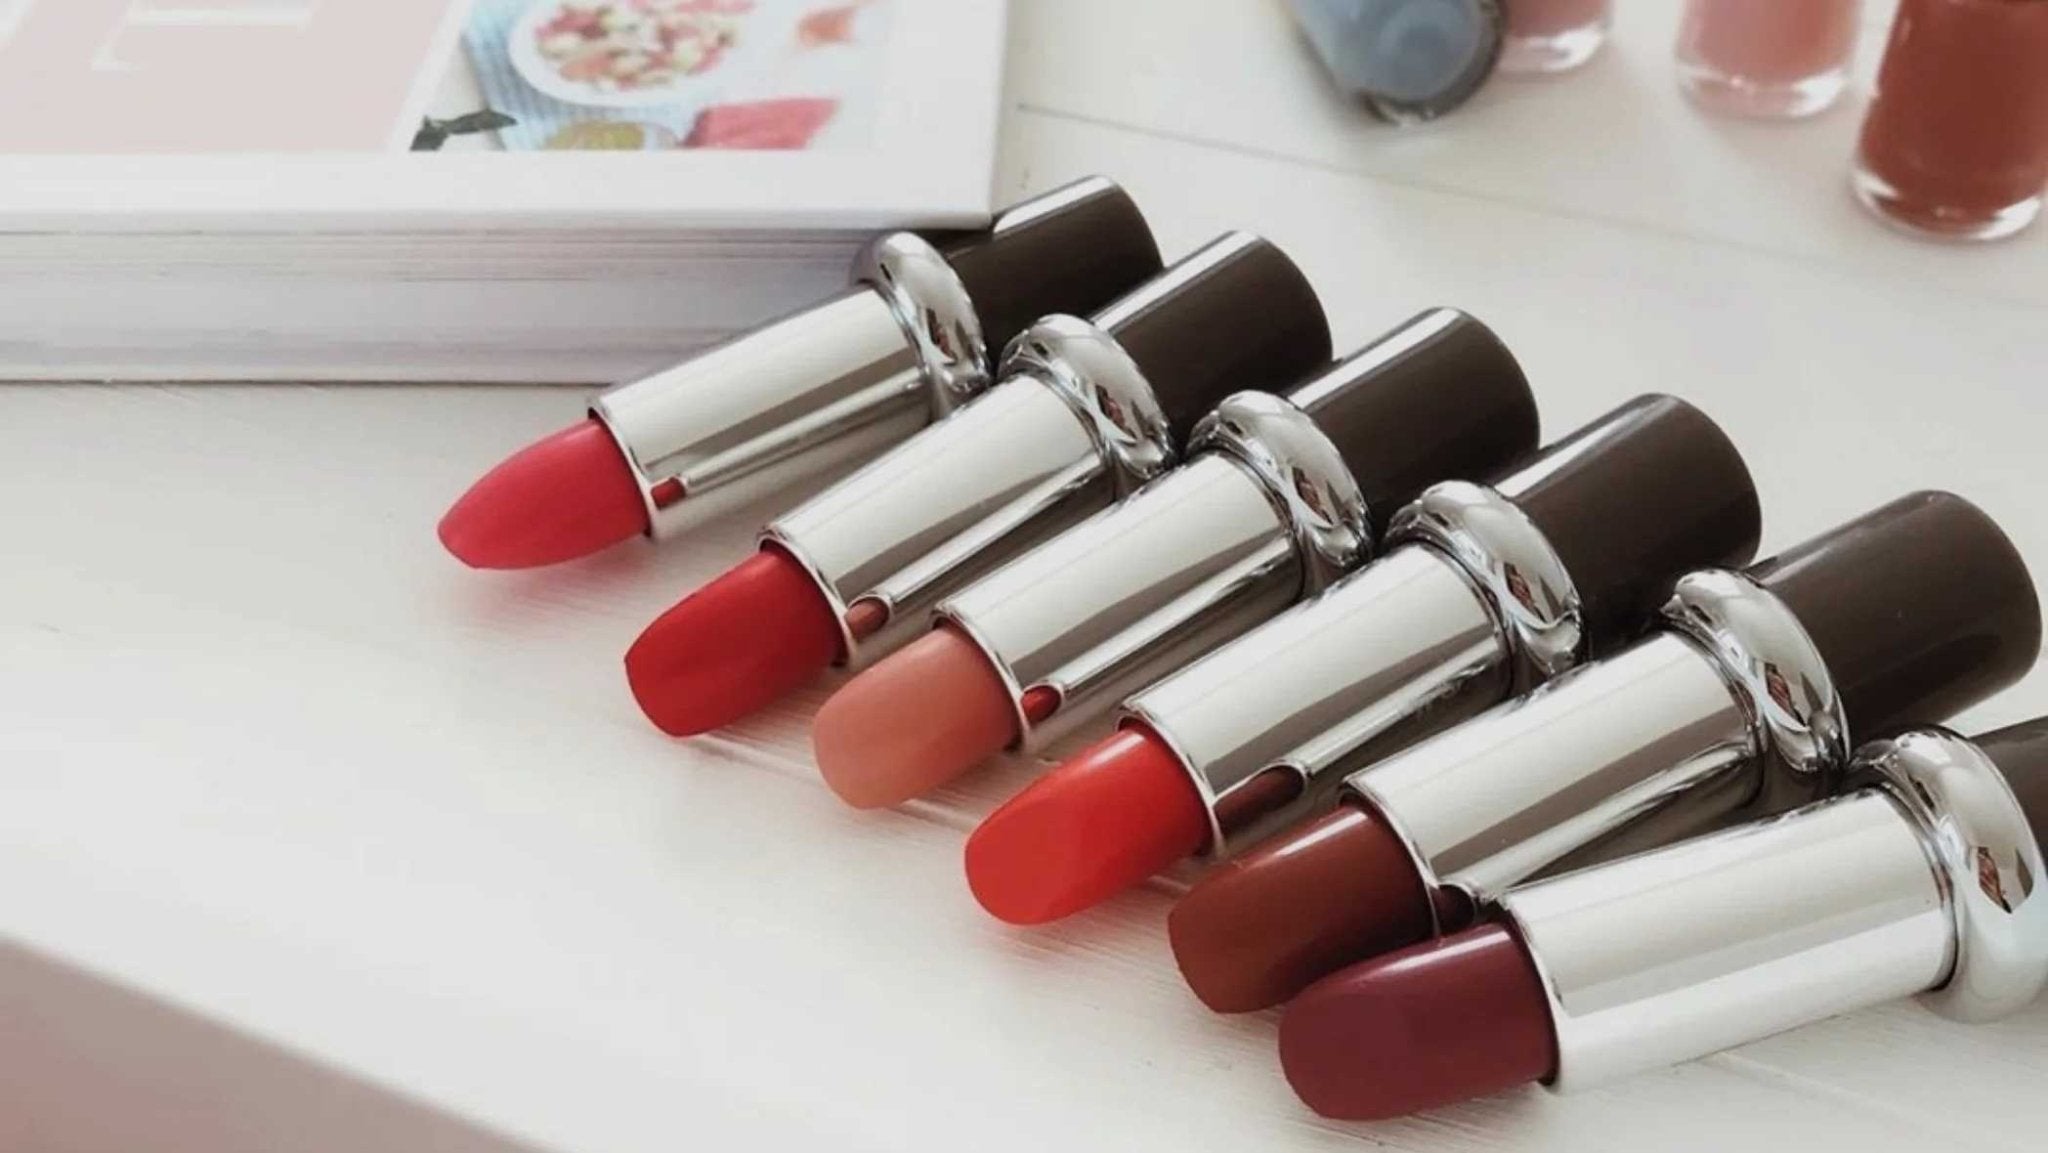 The Lipstick Range Winning over all Hydration Lovers - French Beauty Co.